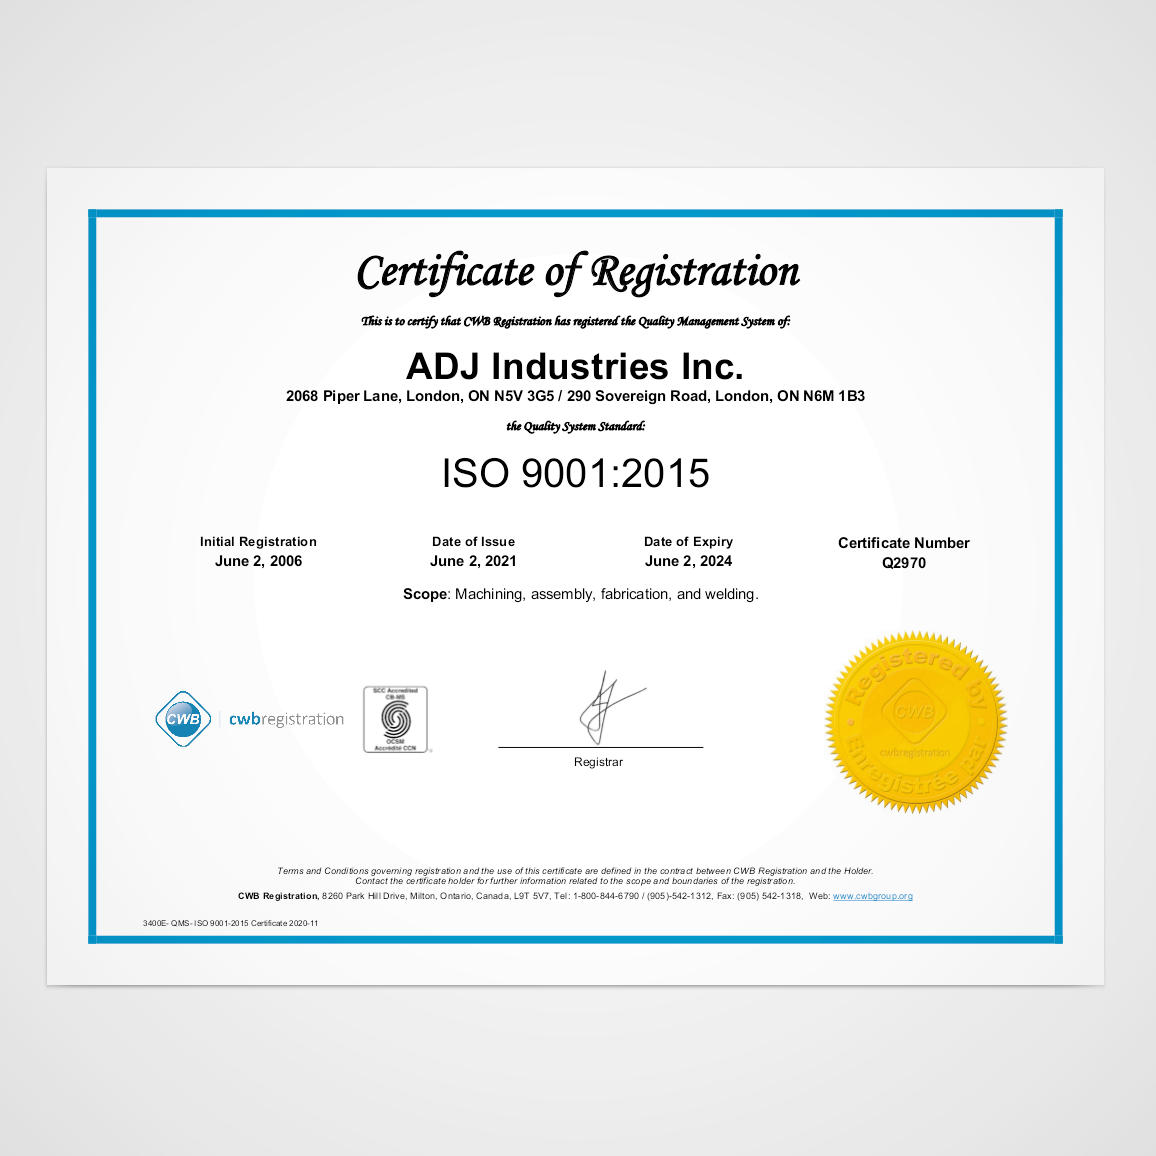 Certificate of Registration ISO 9001:2015 CWB